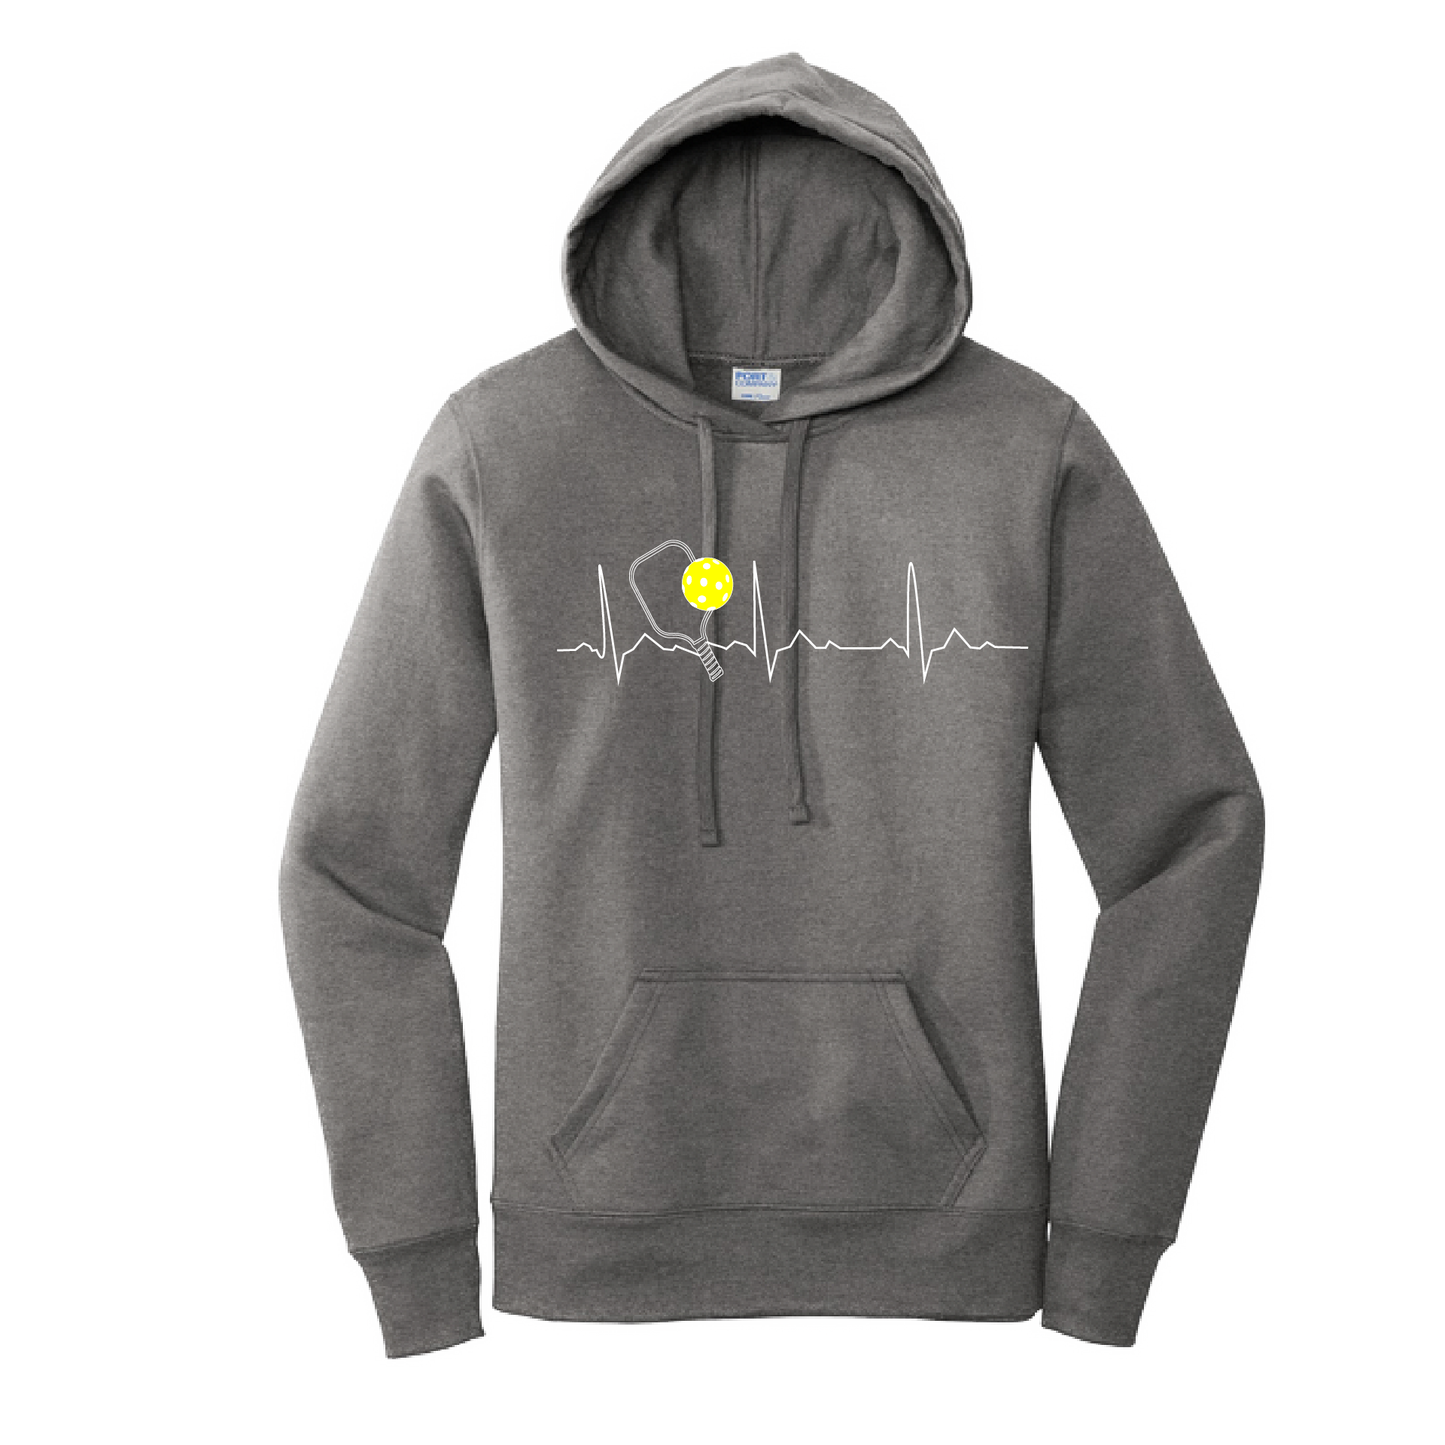 Pickleball Design: Heartbeat  Women's Hooded pullover Sweatshirt  Turn up the volume in this Women's Sweatshirts with its perfect mix of softness and attitude. Ultra soft lined inside with a lined hood also. This is fitted nicely for a women's figure. Front pouch pocket.